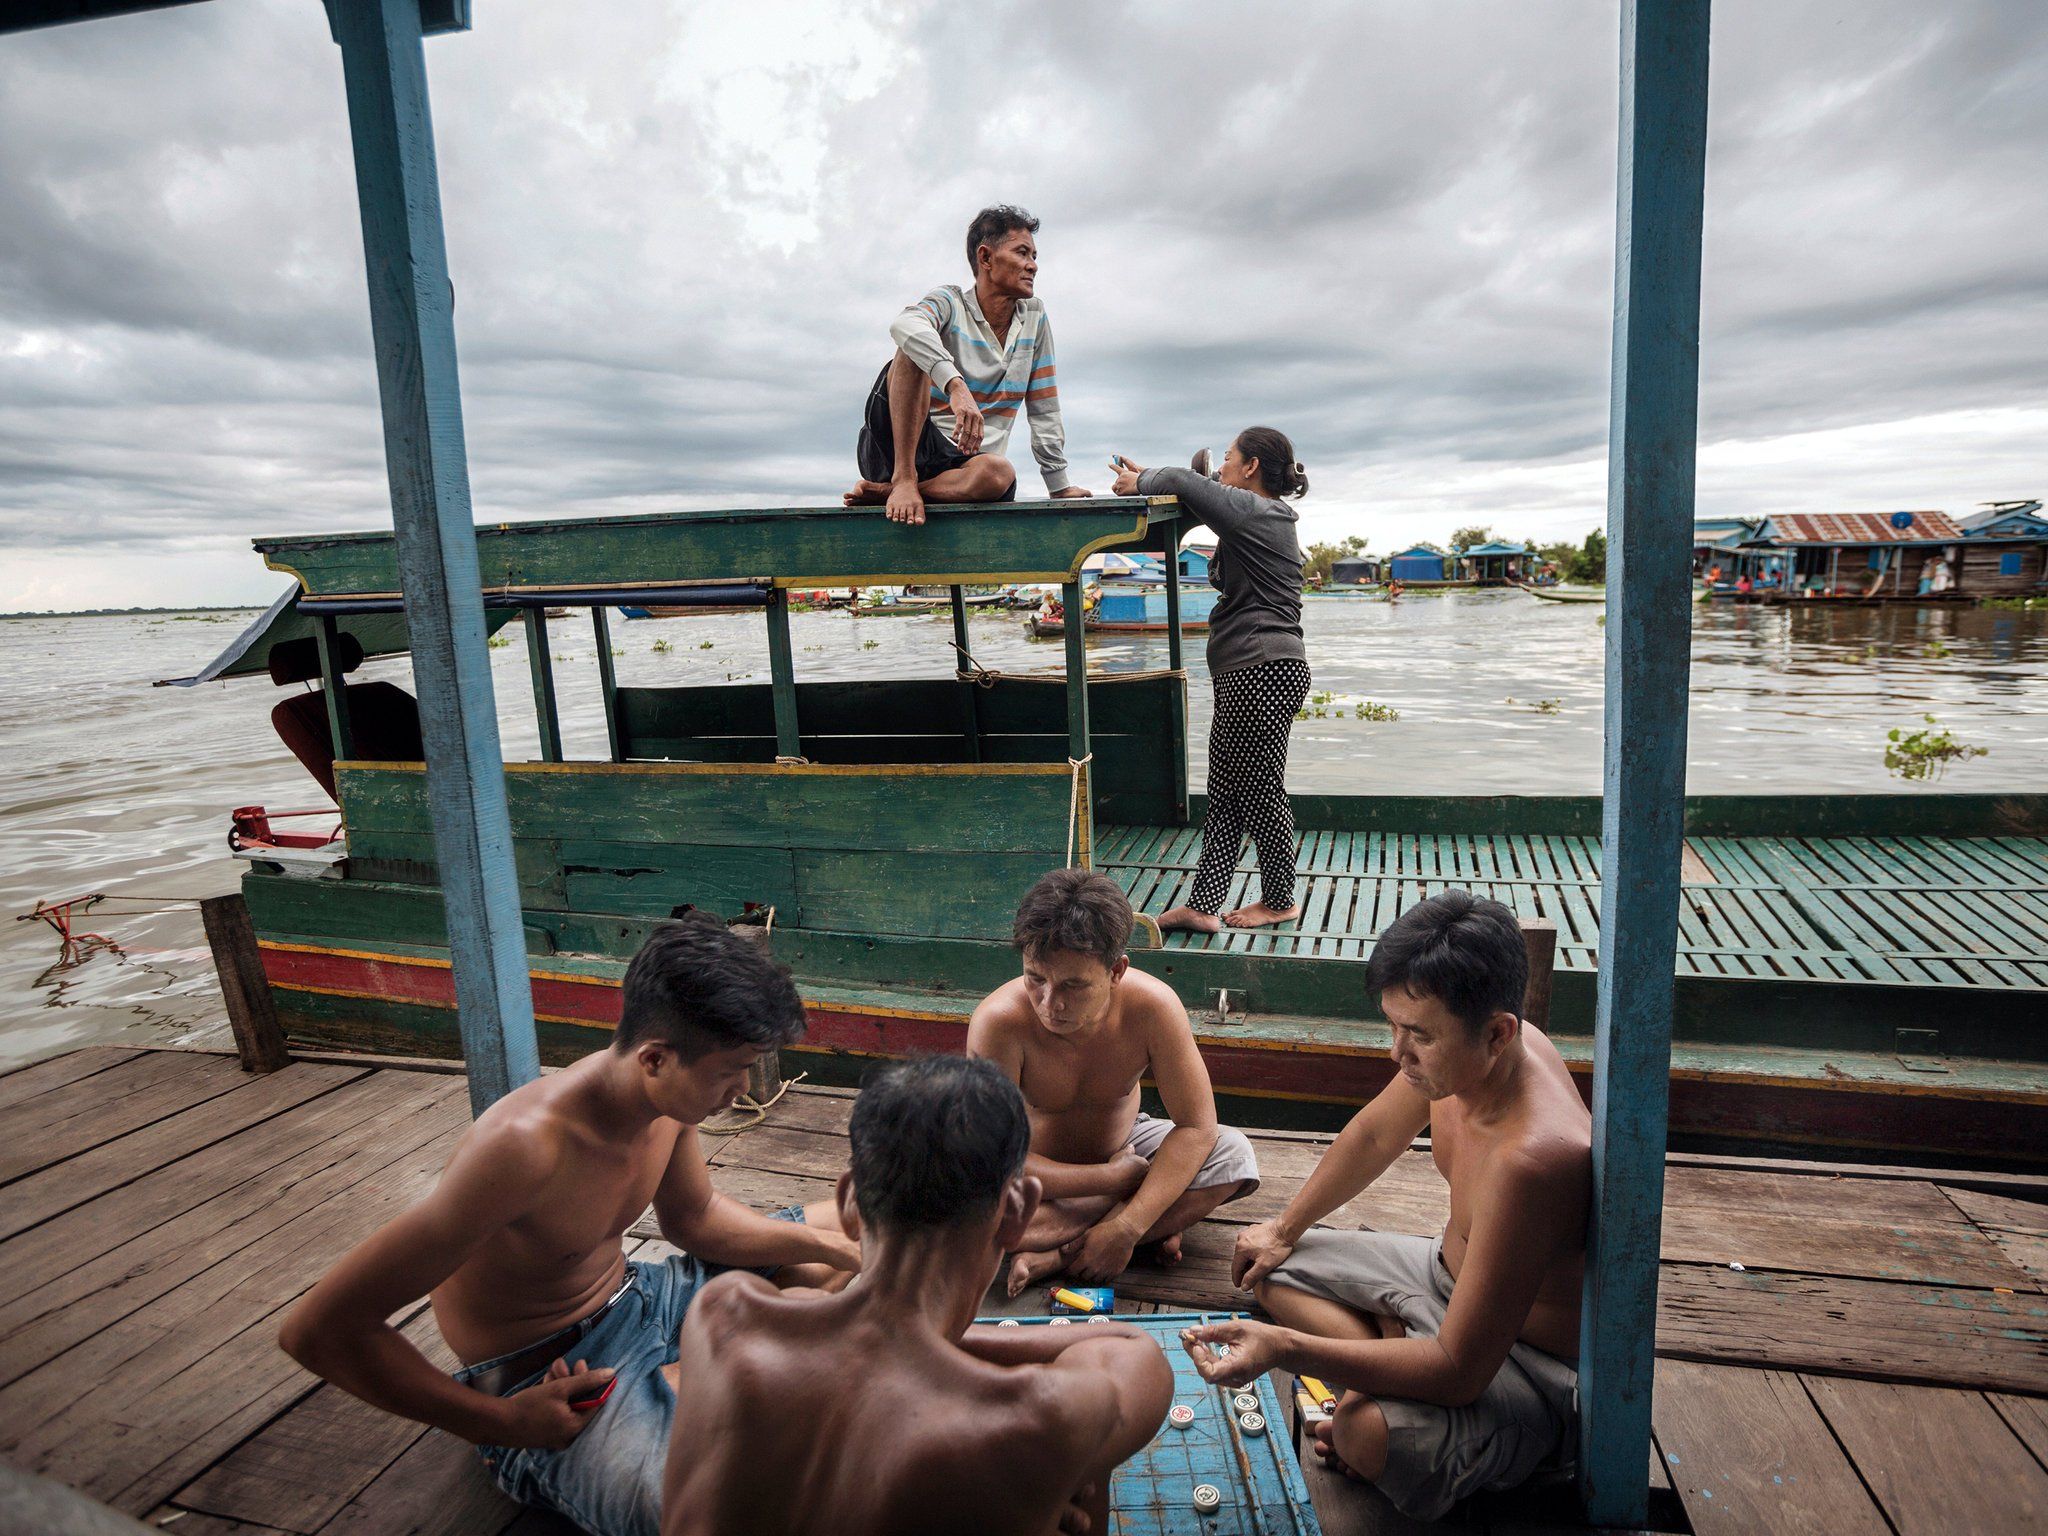 Playing xiangqi on the porch of a floating house in the village of Chhnok Trou. Image by Andrea Frazzetta. Cambodia, 2018.